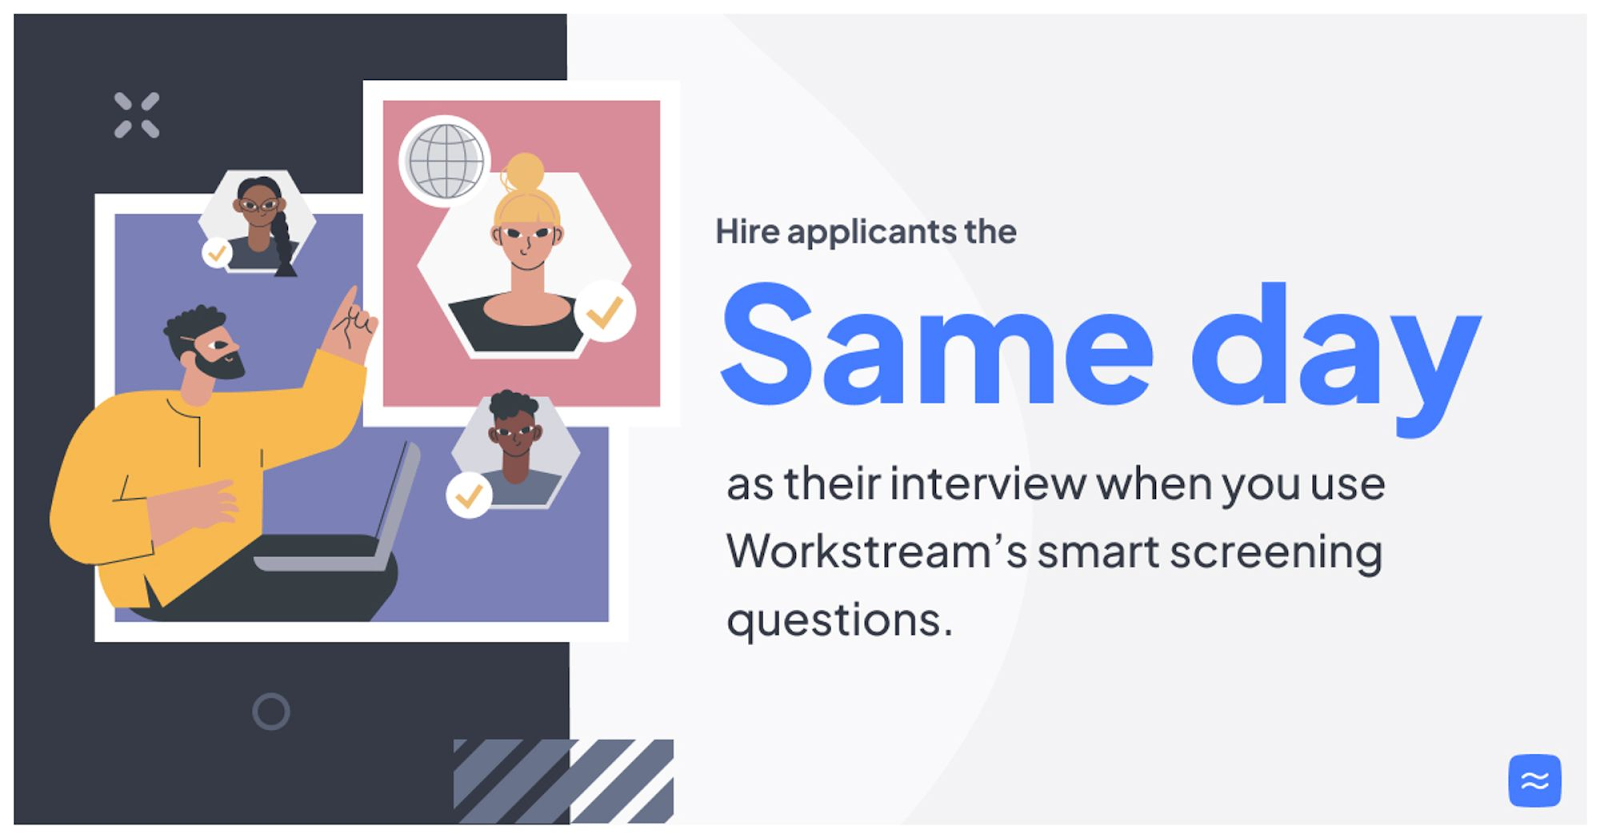 Hire applicants the same day as their interview when you use Workstream's smart screening questions.